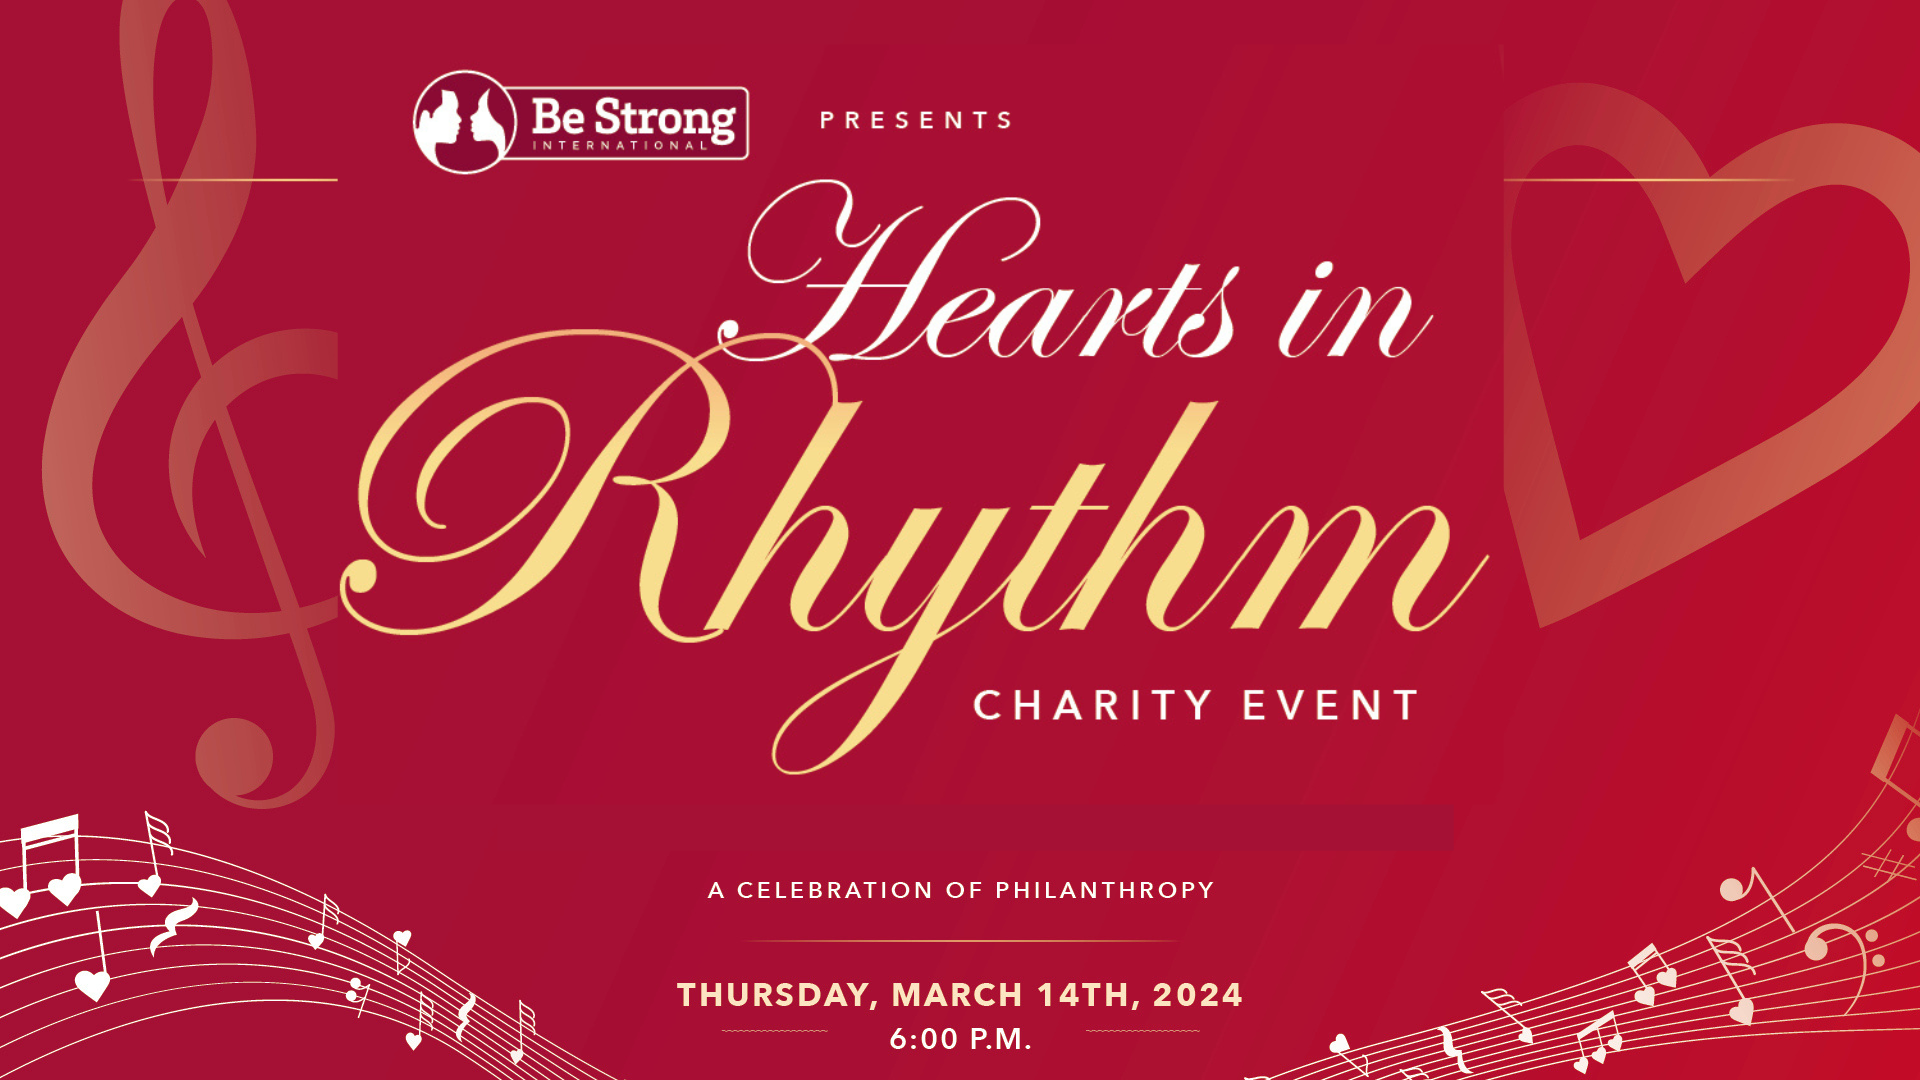 Be Strong International Hosted Its Annual Hearts in Rhythm Charity Event – A Celebration of Philanthropy